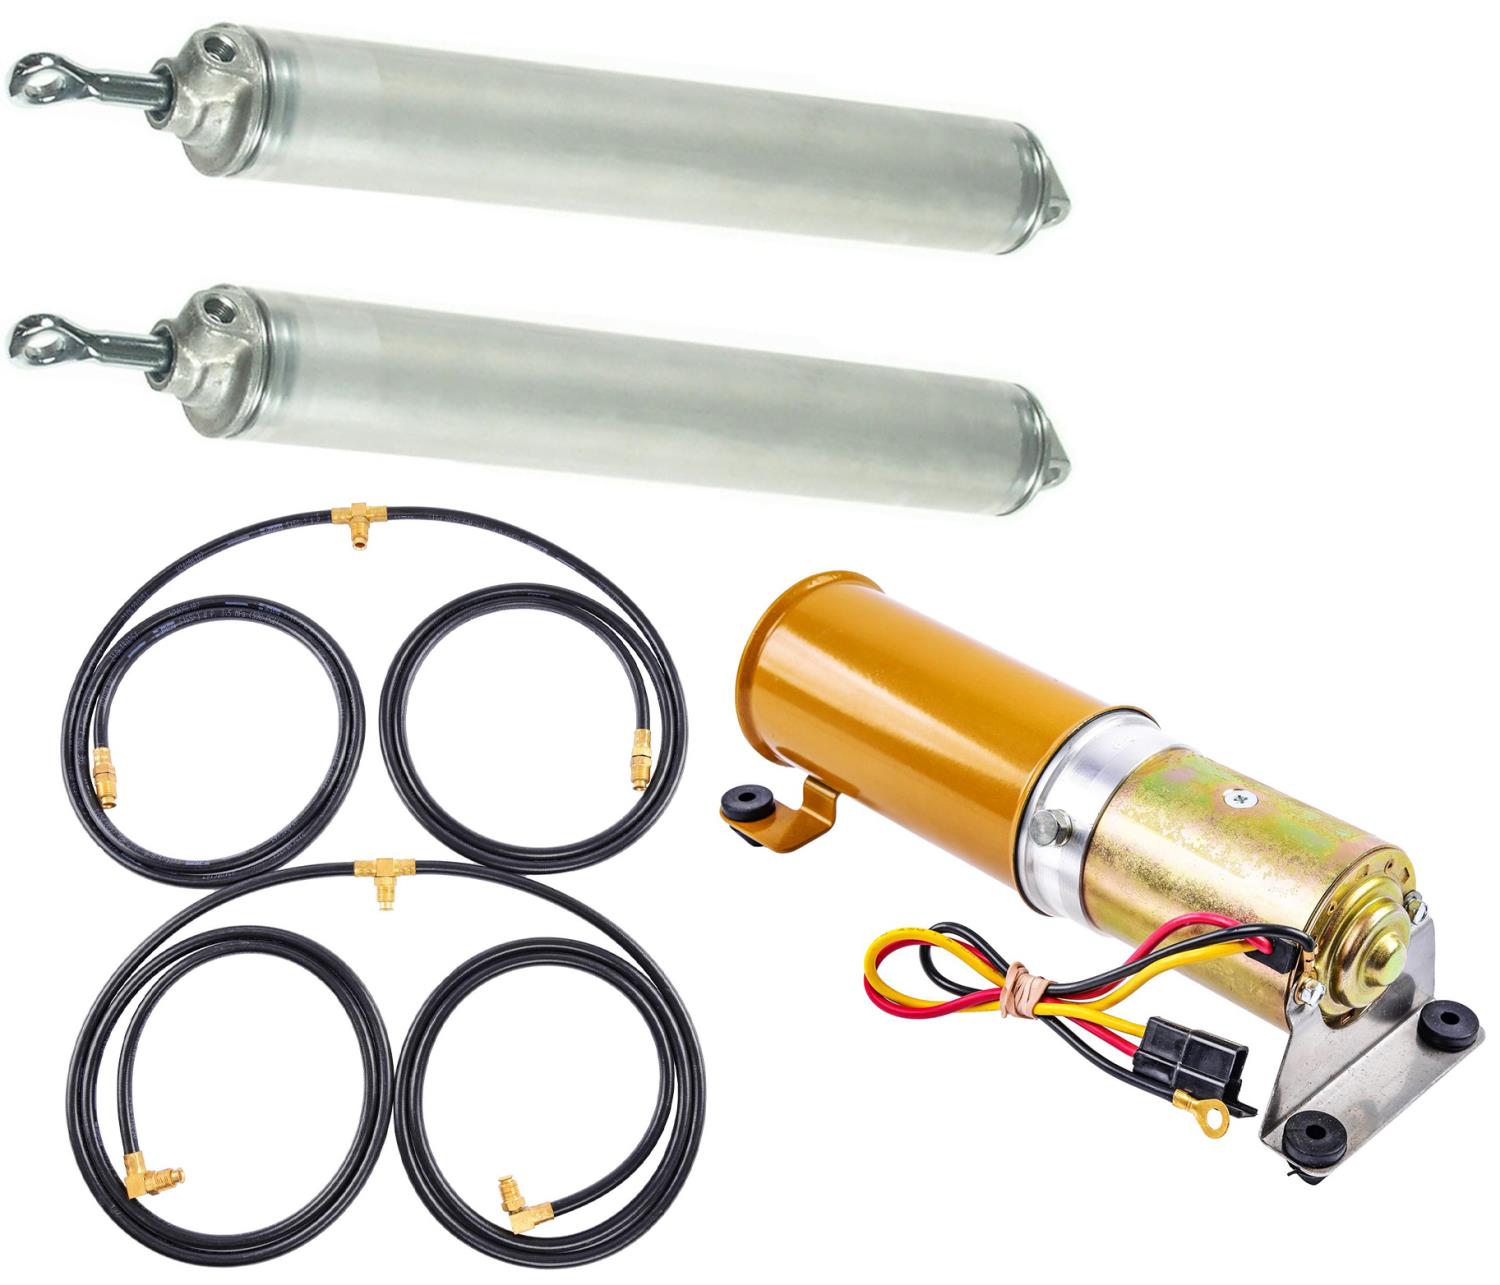 Convertible Top Cylinder, Motor & Hose Kit for 1959-1960 Buick, Cadillac, Chevy, Olds, Pontiac Convertibles [Sold as a Kit]